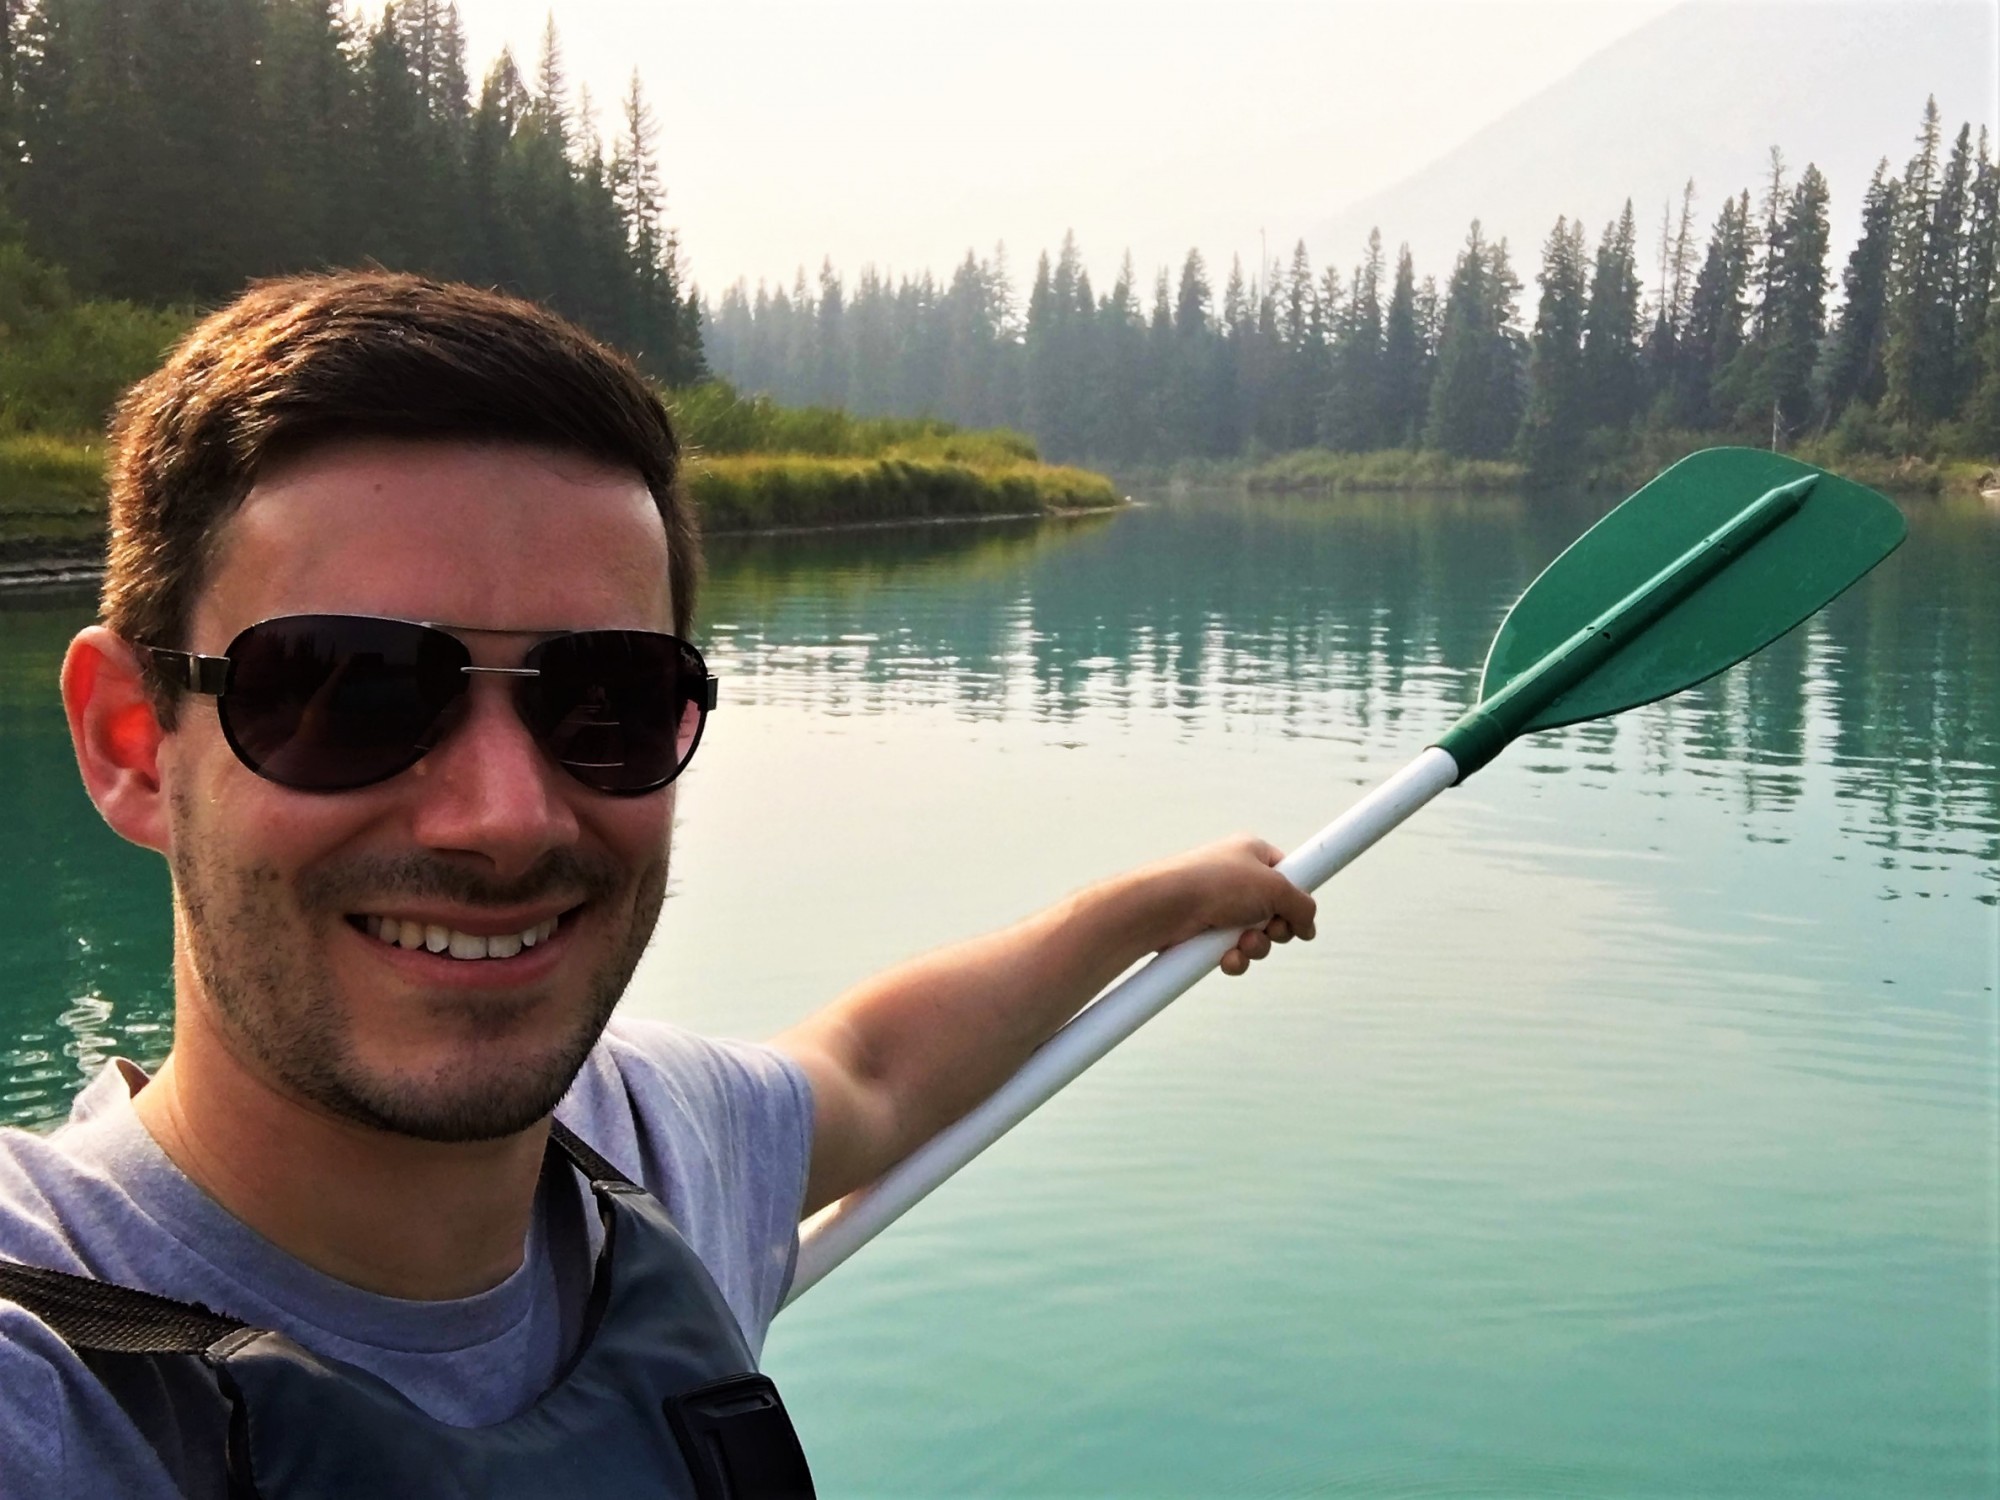 Nick canoeing the Bow River in Banff